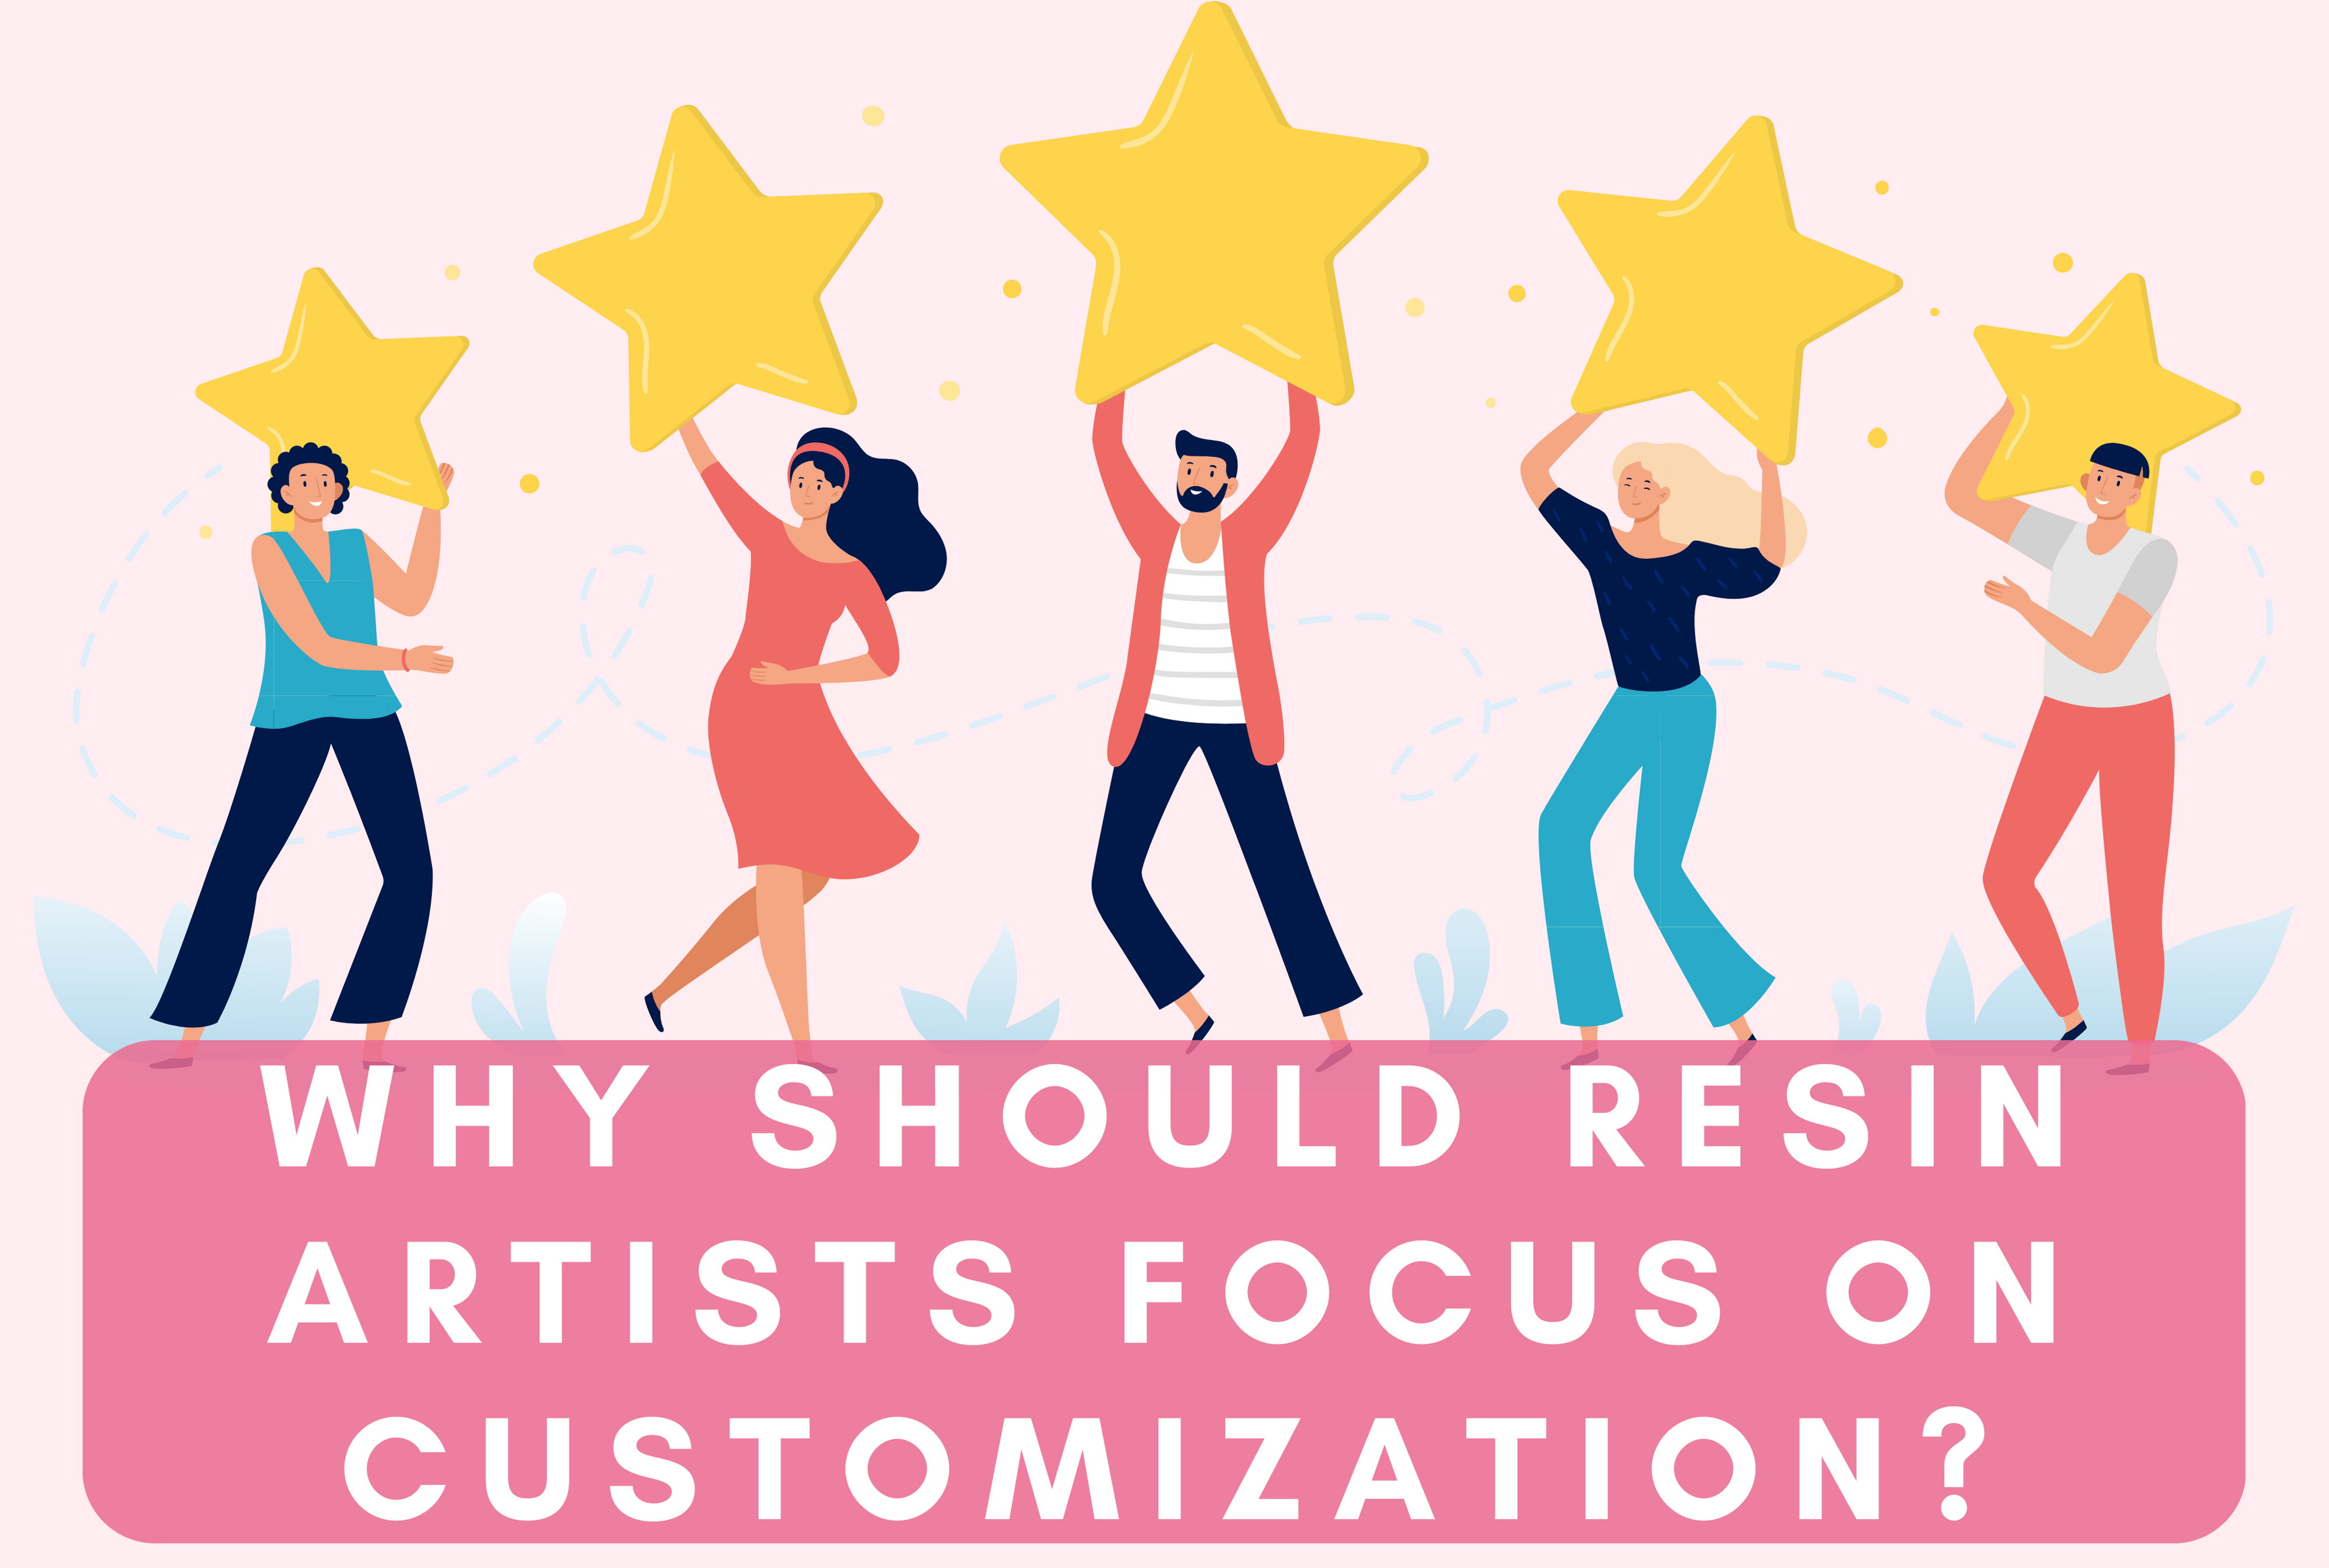 Why should resin artists focus on customization?